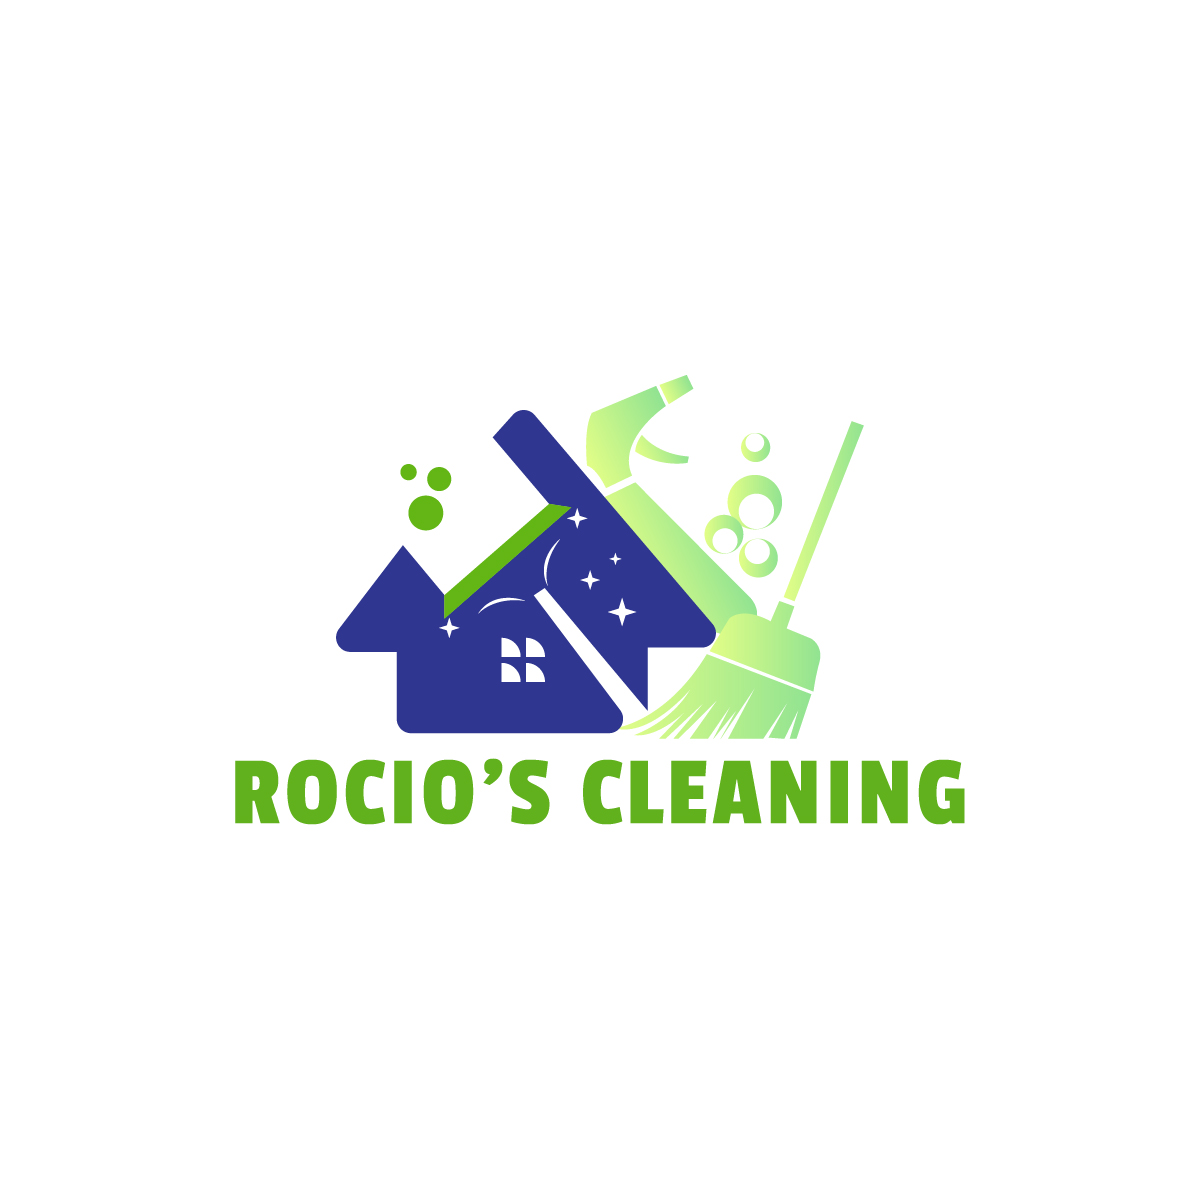 Rocio's Cleaning